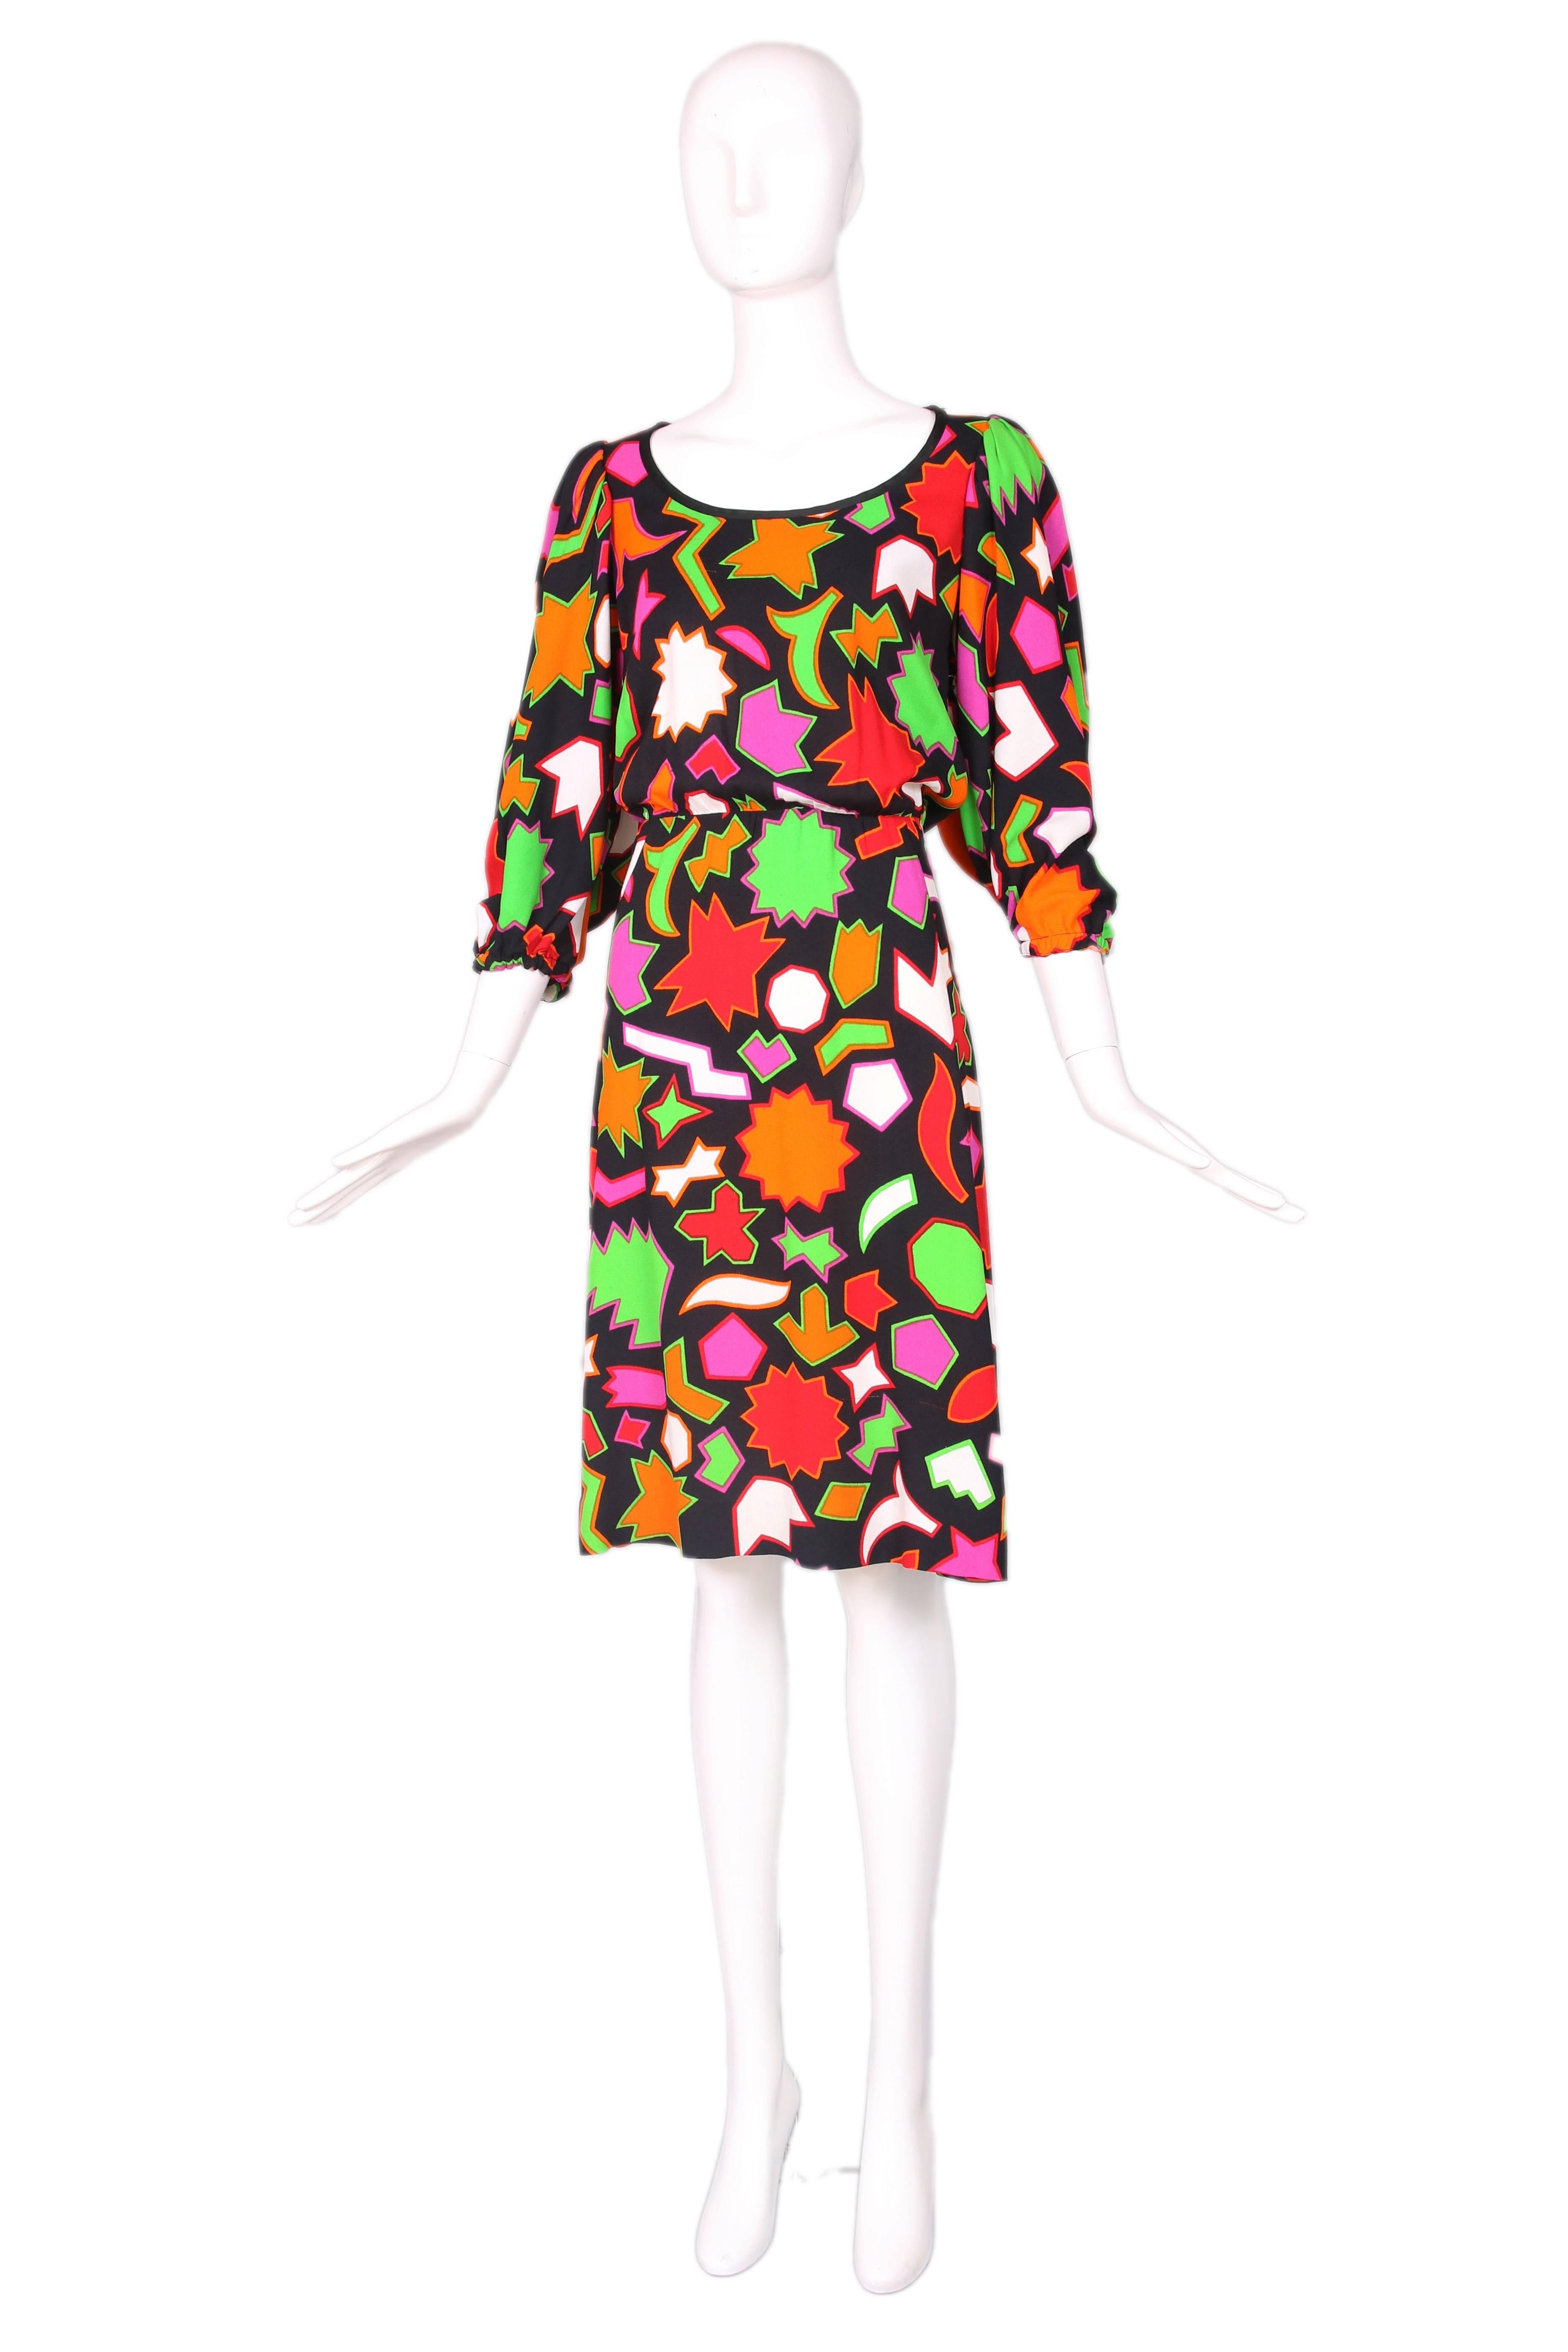 1980'S Yves Saint Laurent crepe day dress with 3/4 balloon sleeves and a multi-colored abstract print in purple, red, orange, white, and green on a black background. Features a scoop neck with black trim, flared skirt and a hidden side zipper